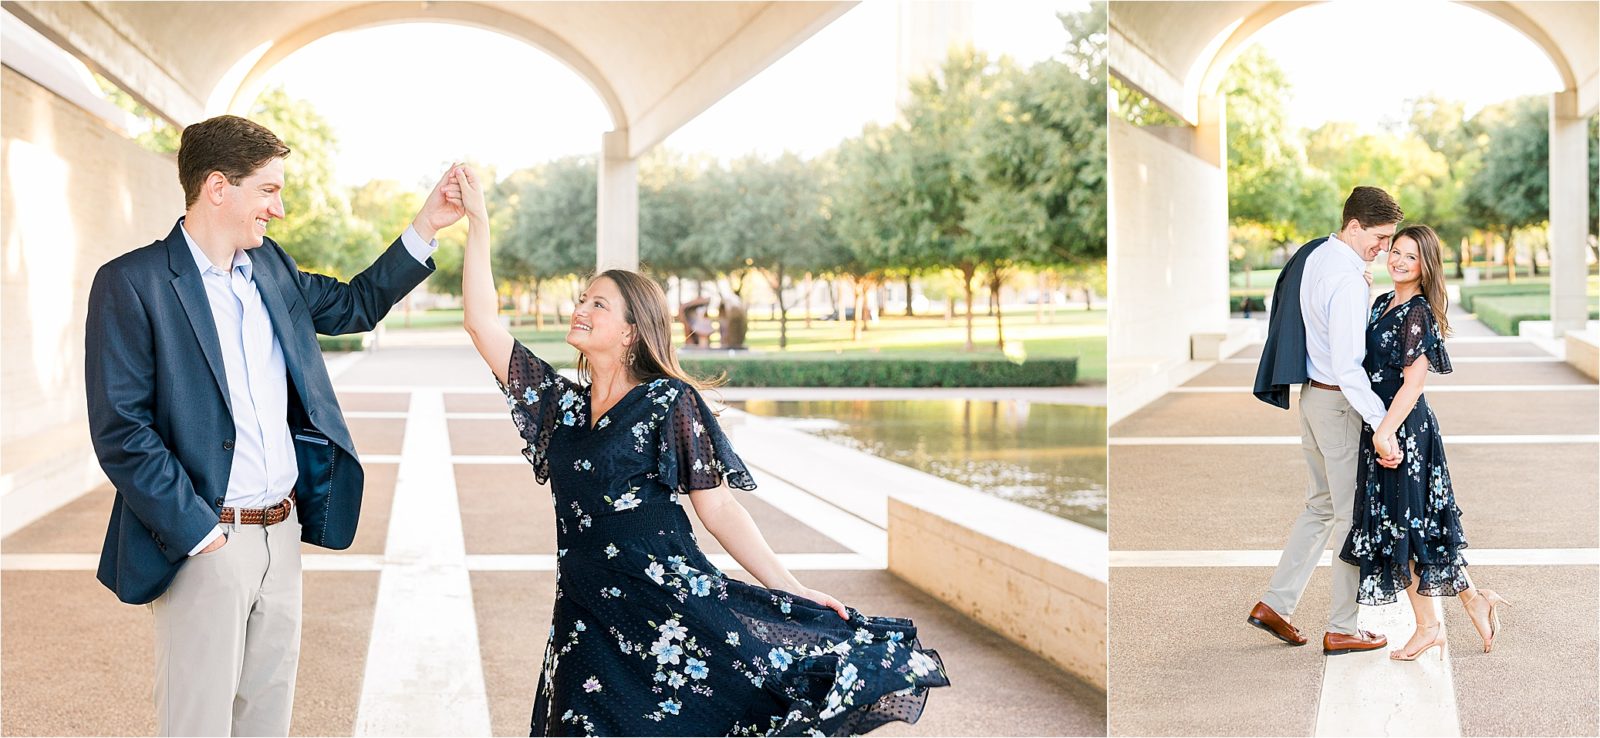 An engaged couple dances under the arches during a photography session at The Kimball Art Museum in Fort Worth, Texas